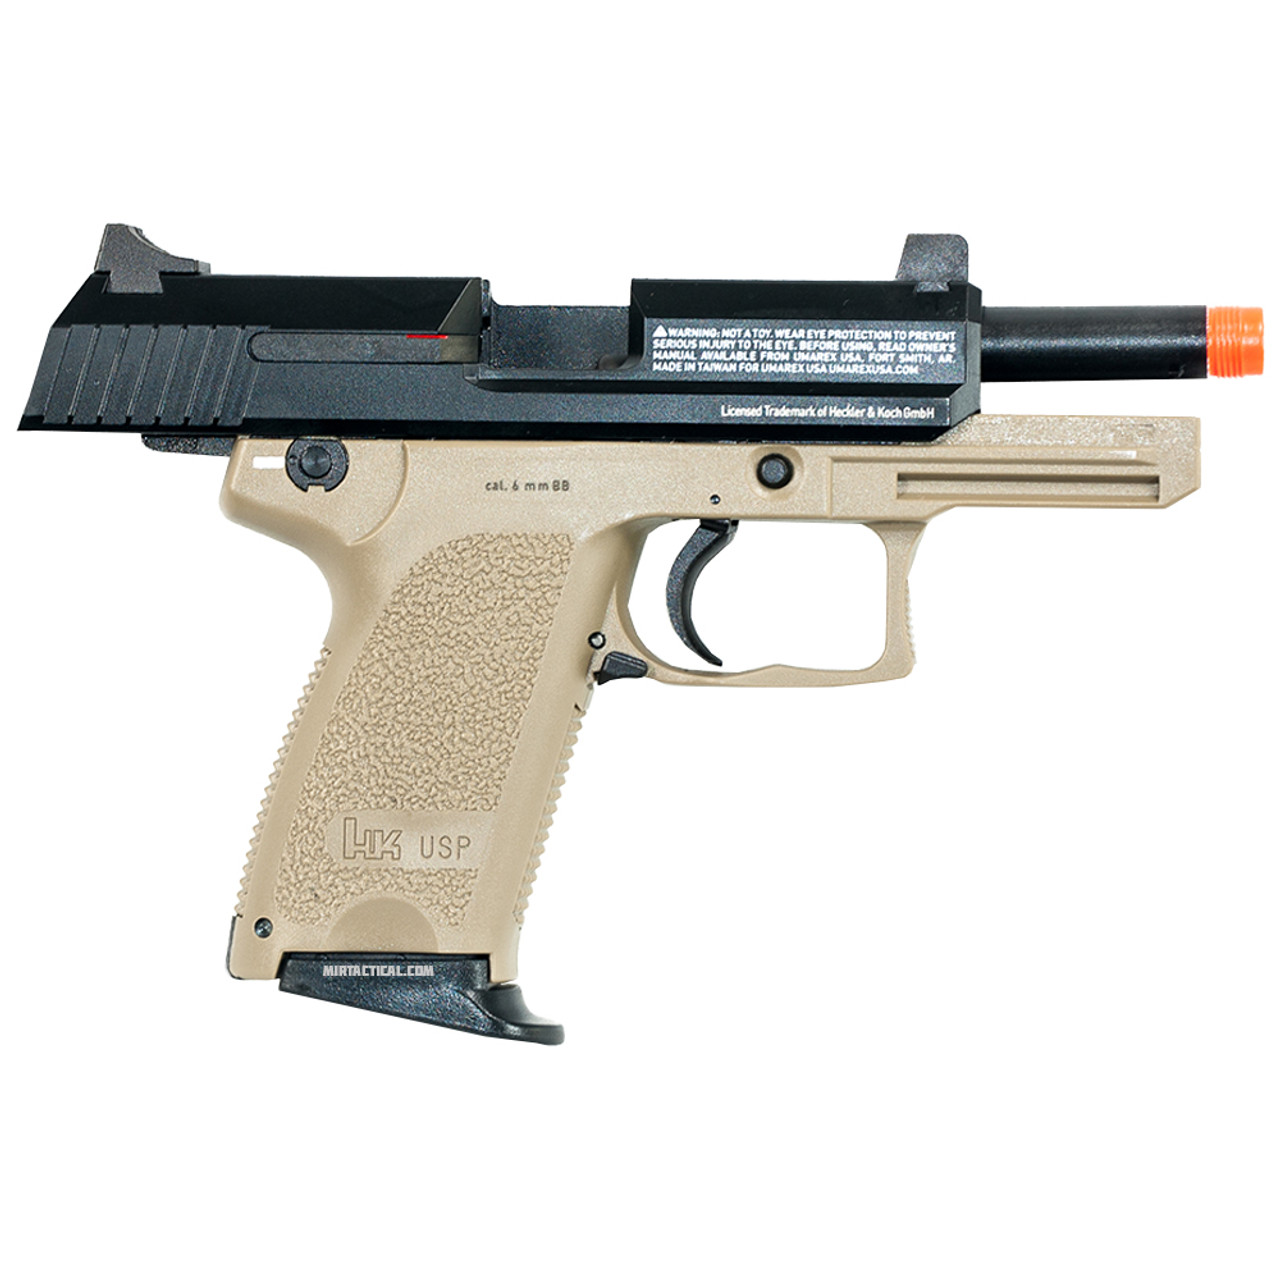 Elite Force H&K USP Compact GBB Airsoft Pistol By KWA